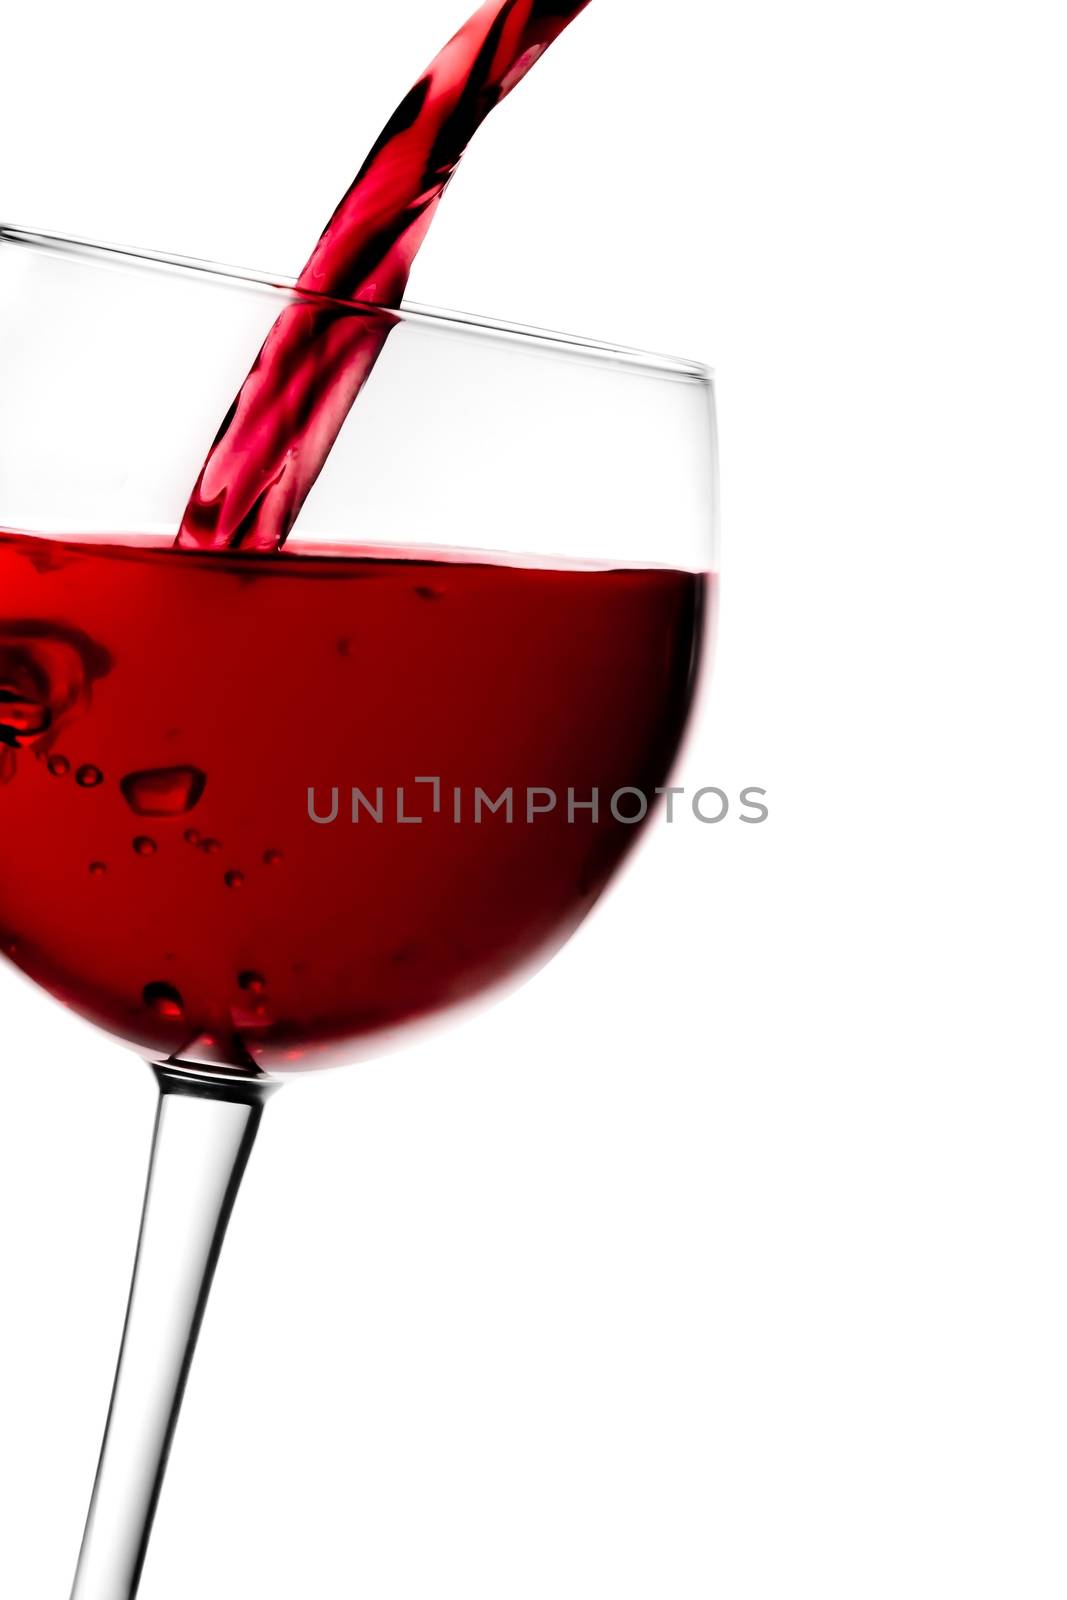 red wine pouring into half glass tilted with space for text on a white background